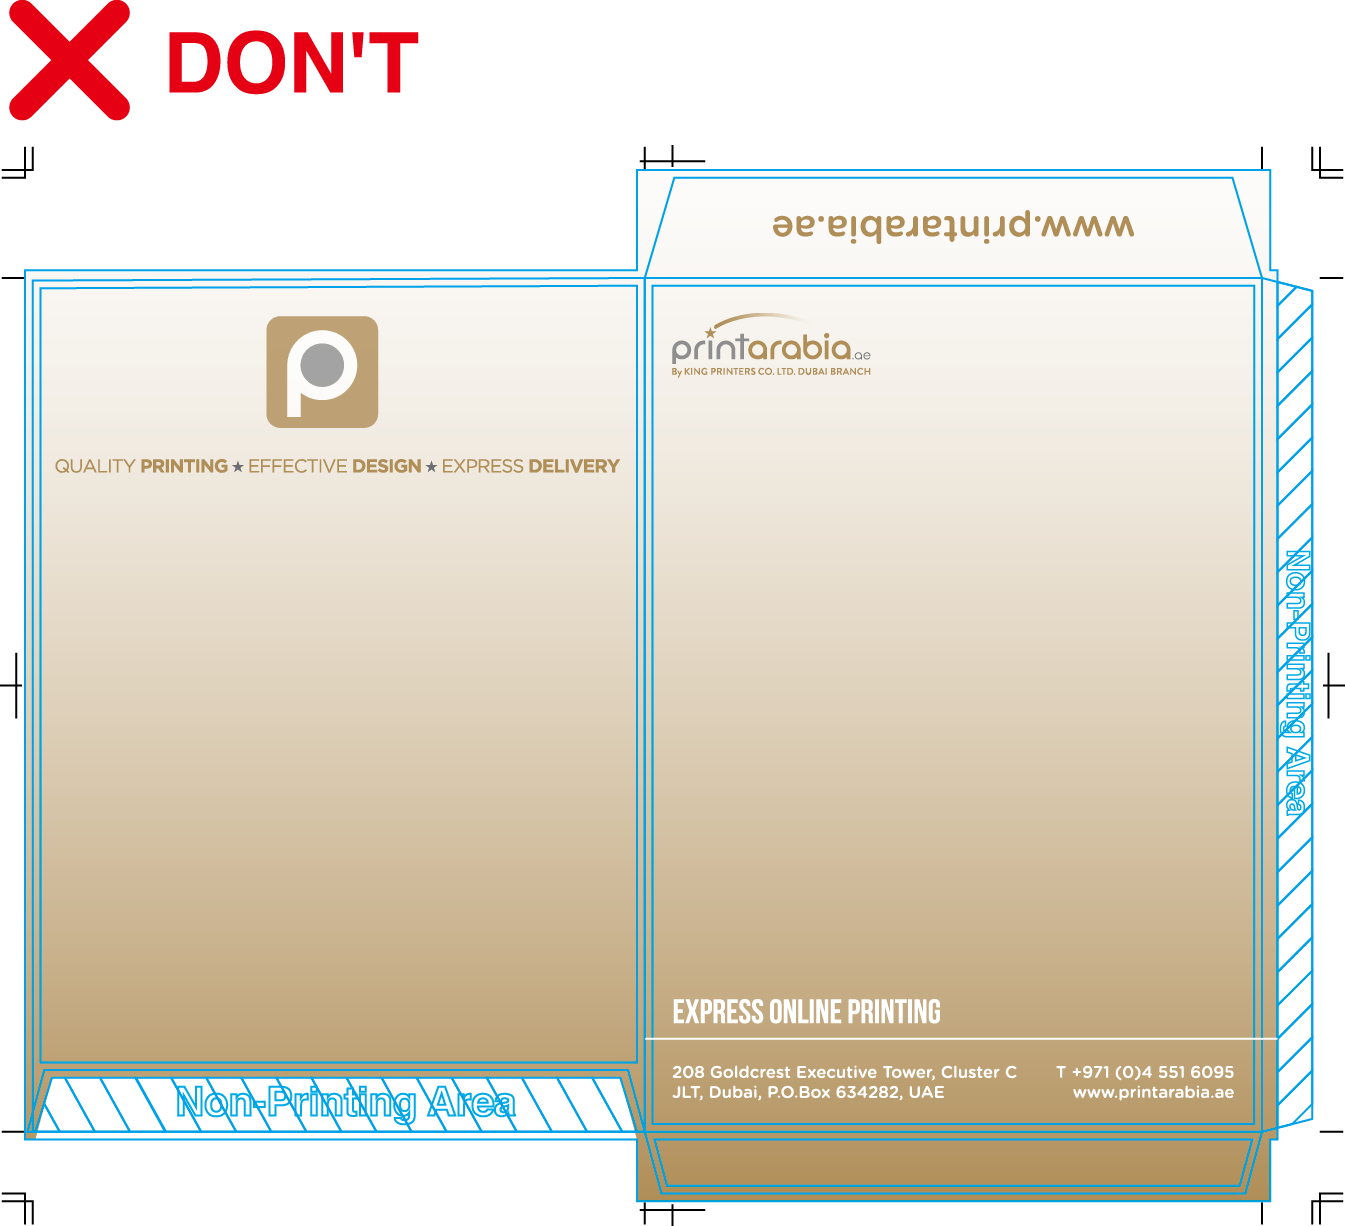 Custom Envelopes - Do's and Don'ts when laying out your design 01 Image